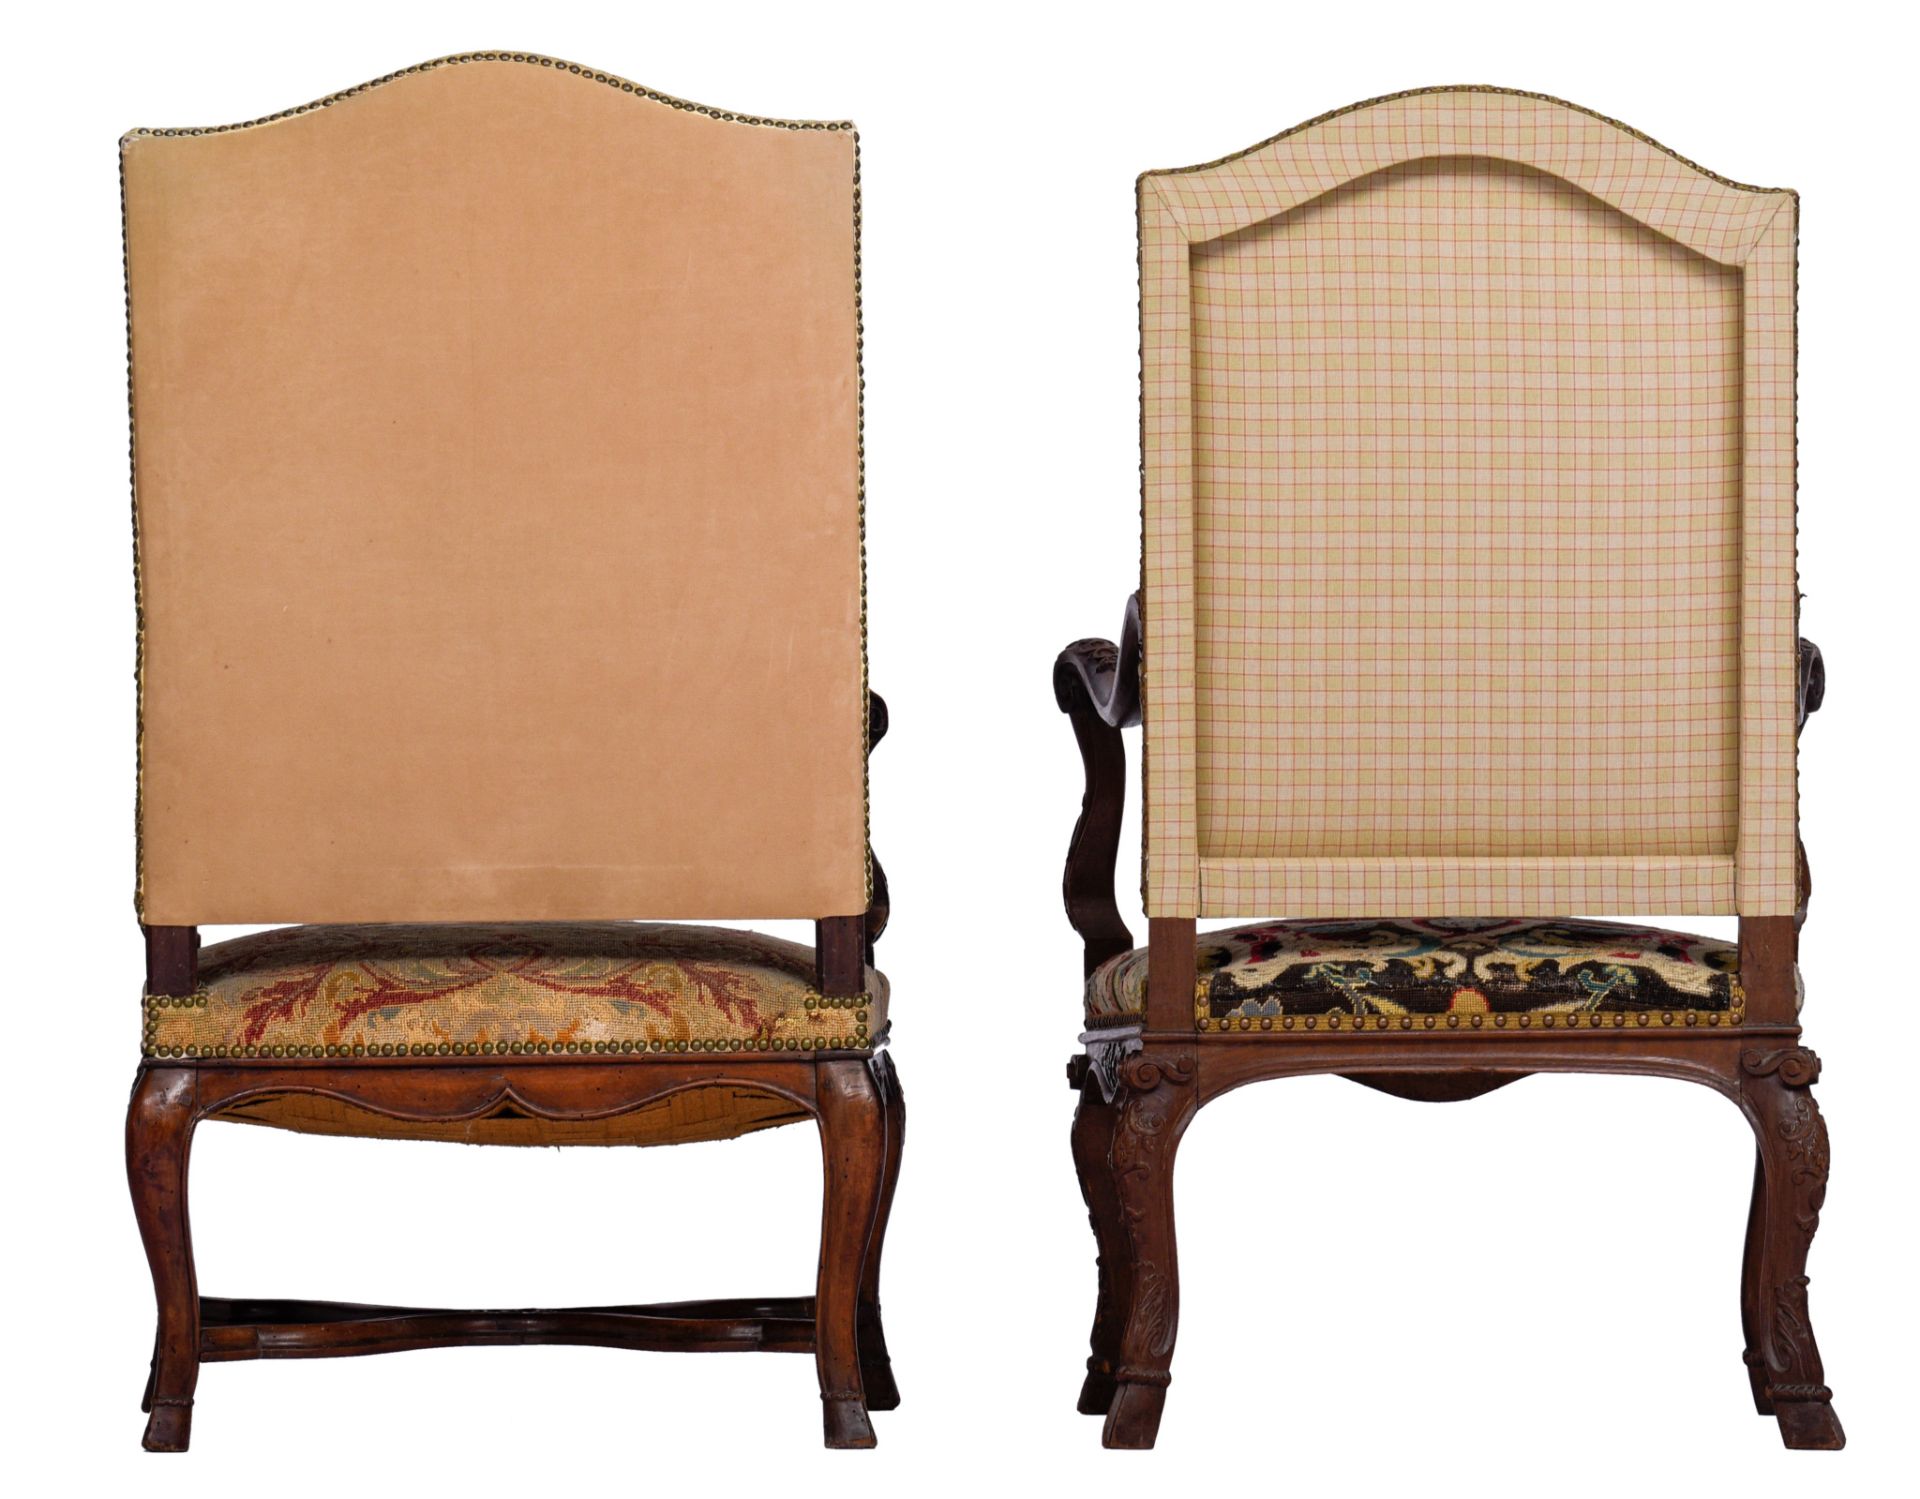 Two carved walnut Régence armchairs, H 120 - W 71 - H 116 - W 70 cm - Image 5 of 24